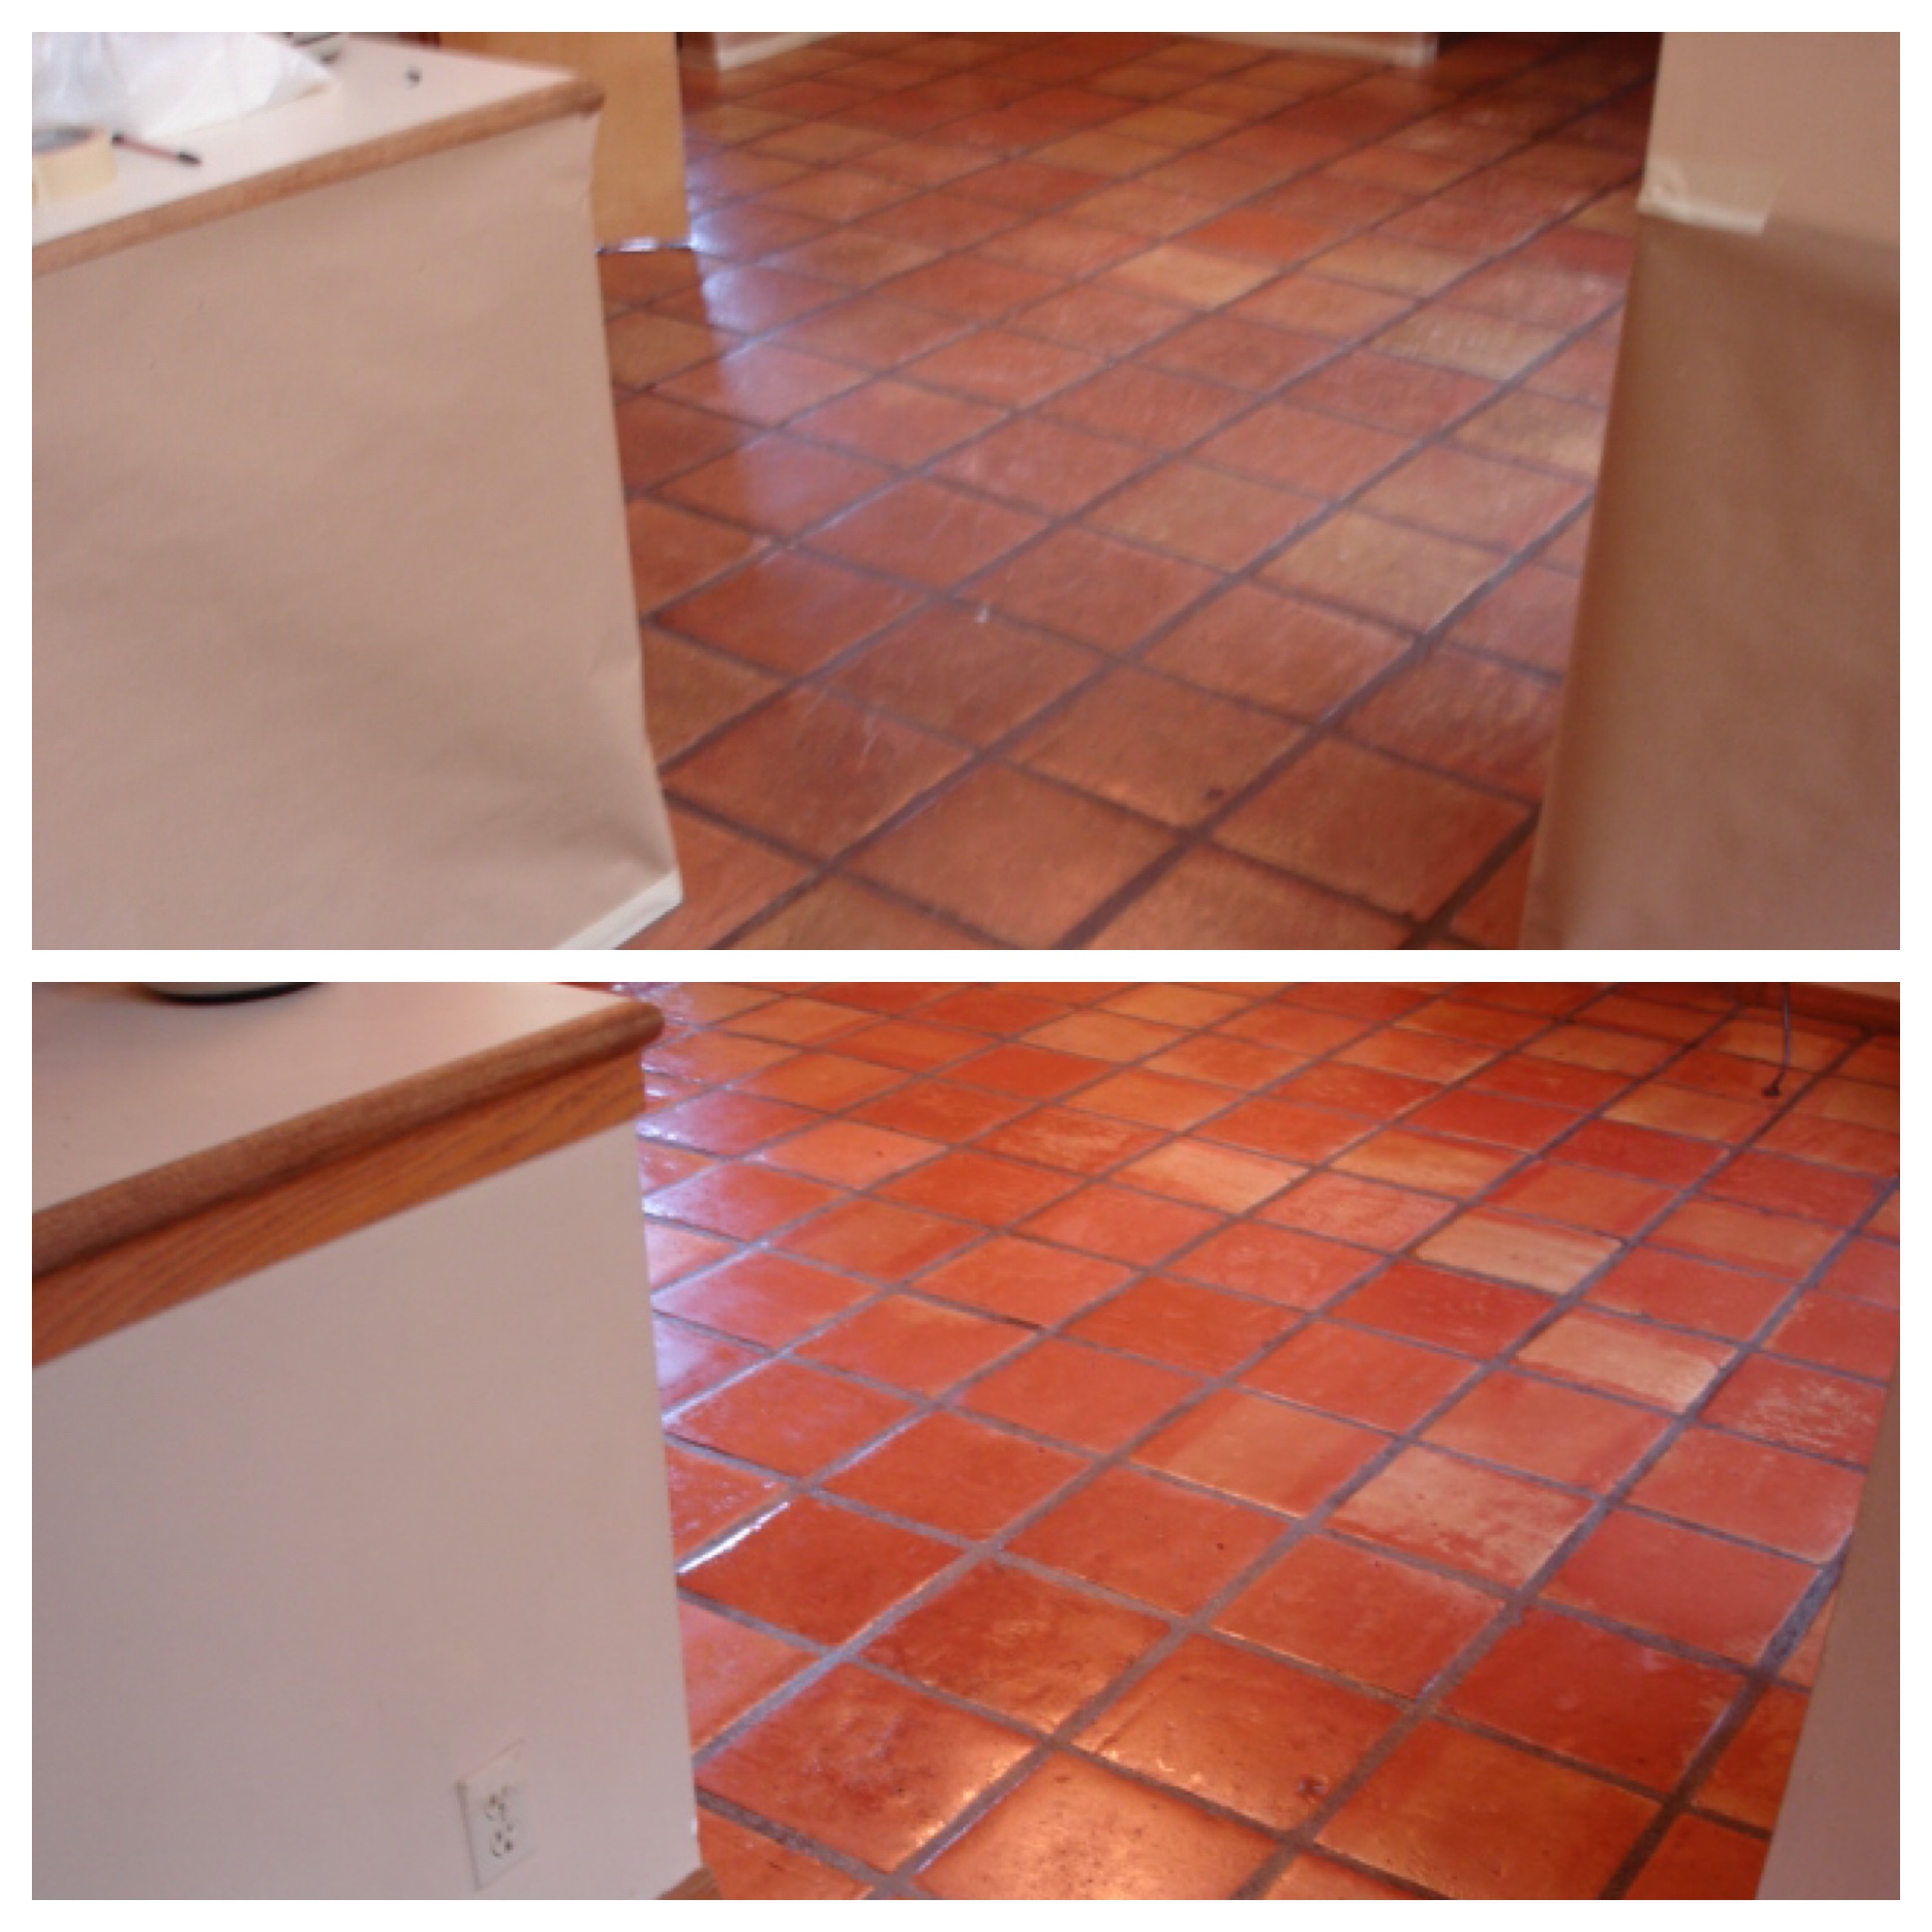 heavy coating removal on mexican tile